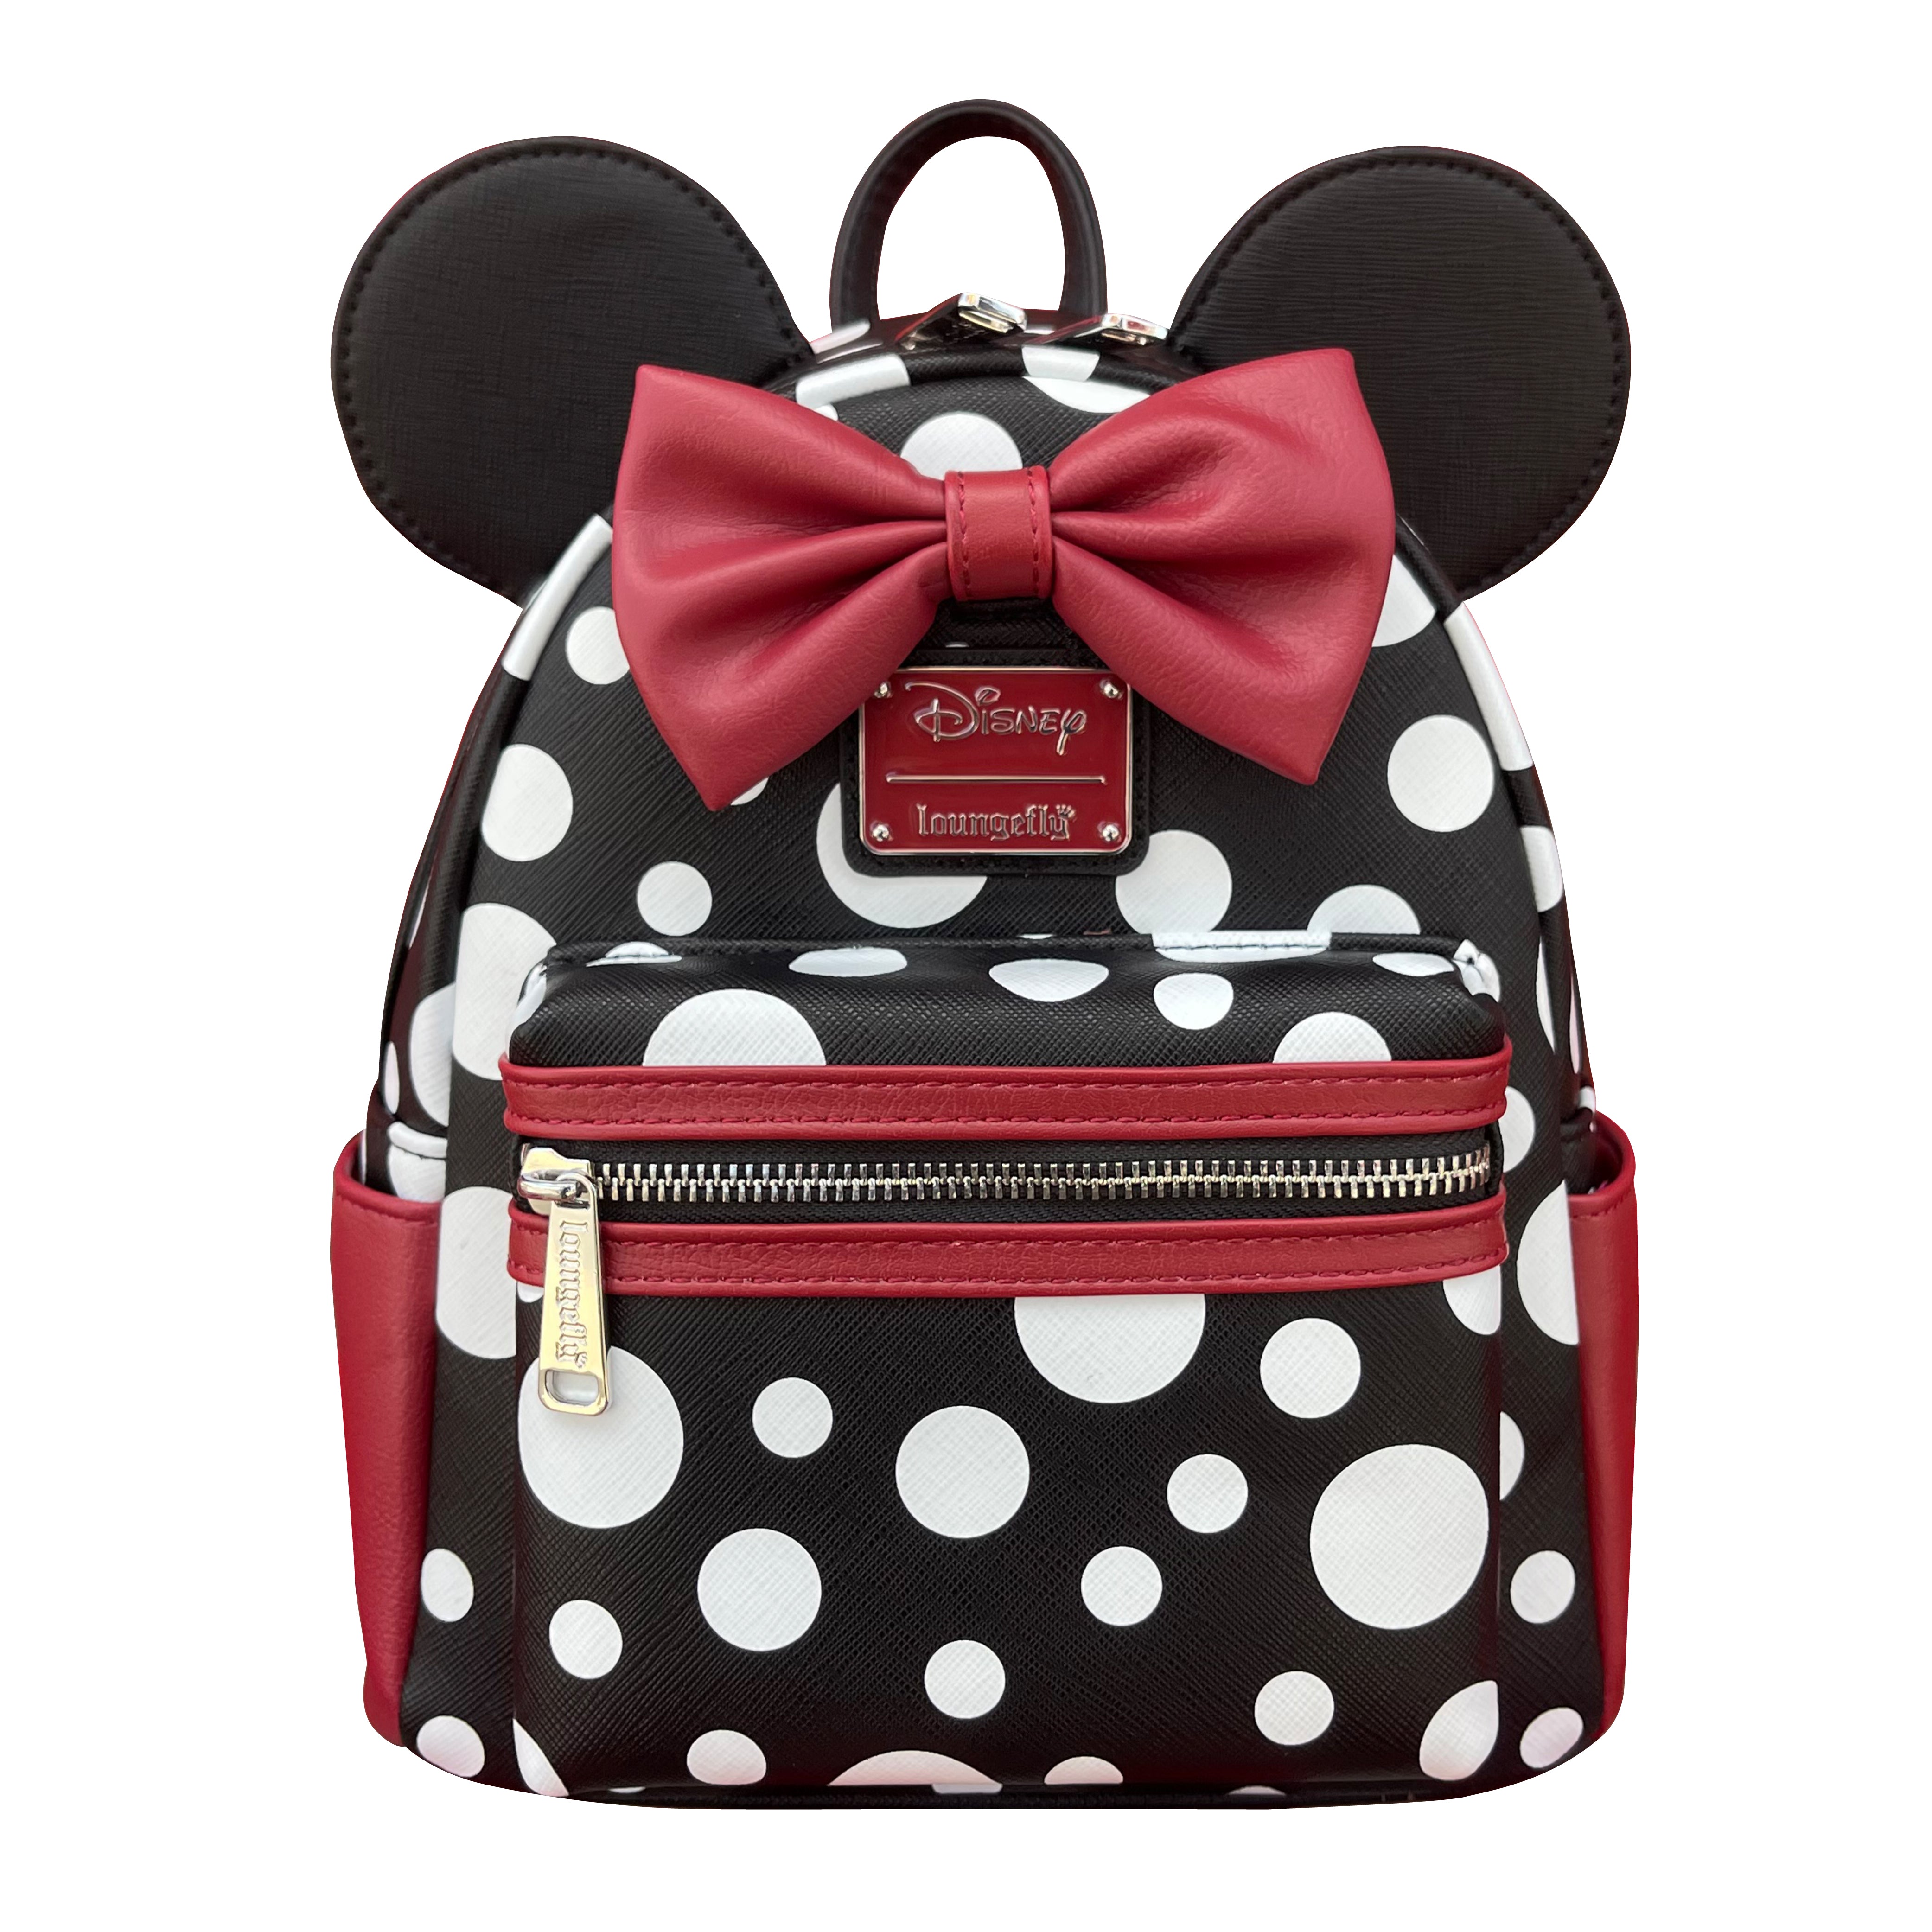 Fast Forward Minnie Mouse Backpack for Women Set - 2 Pack Bundle India |  Ubuy